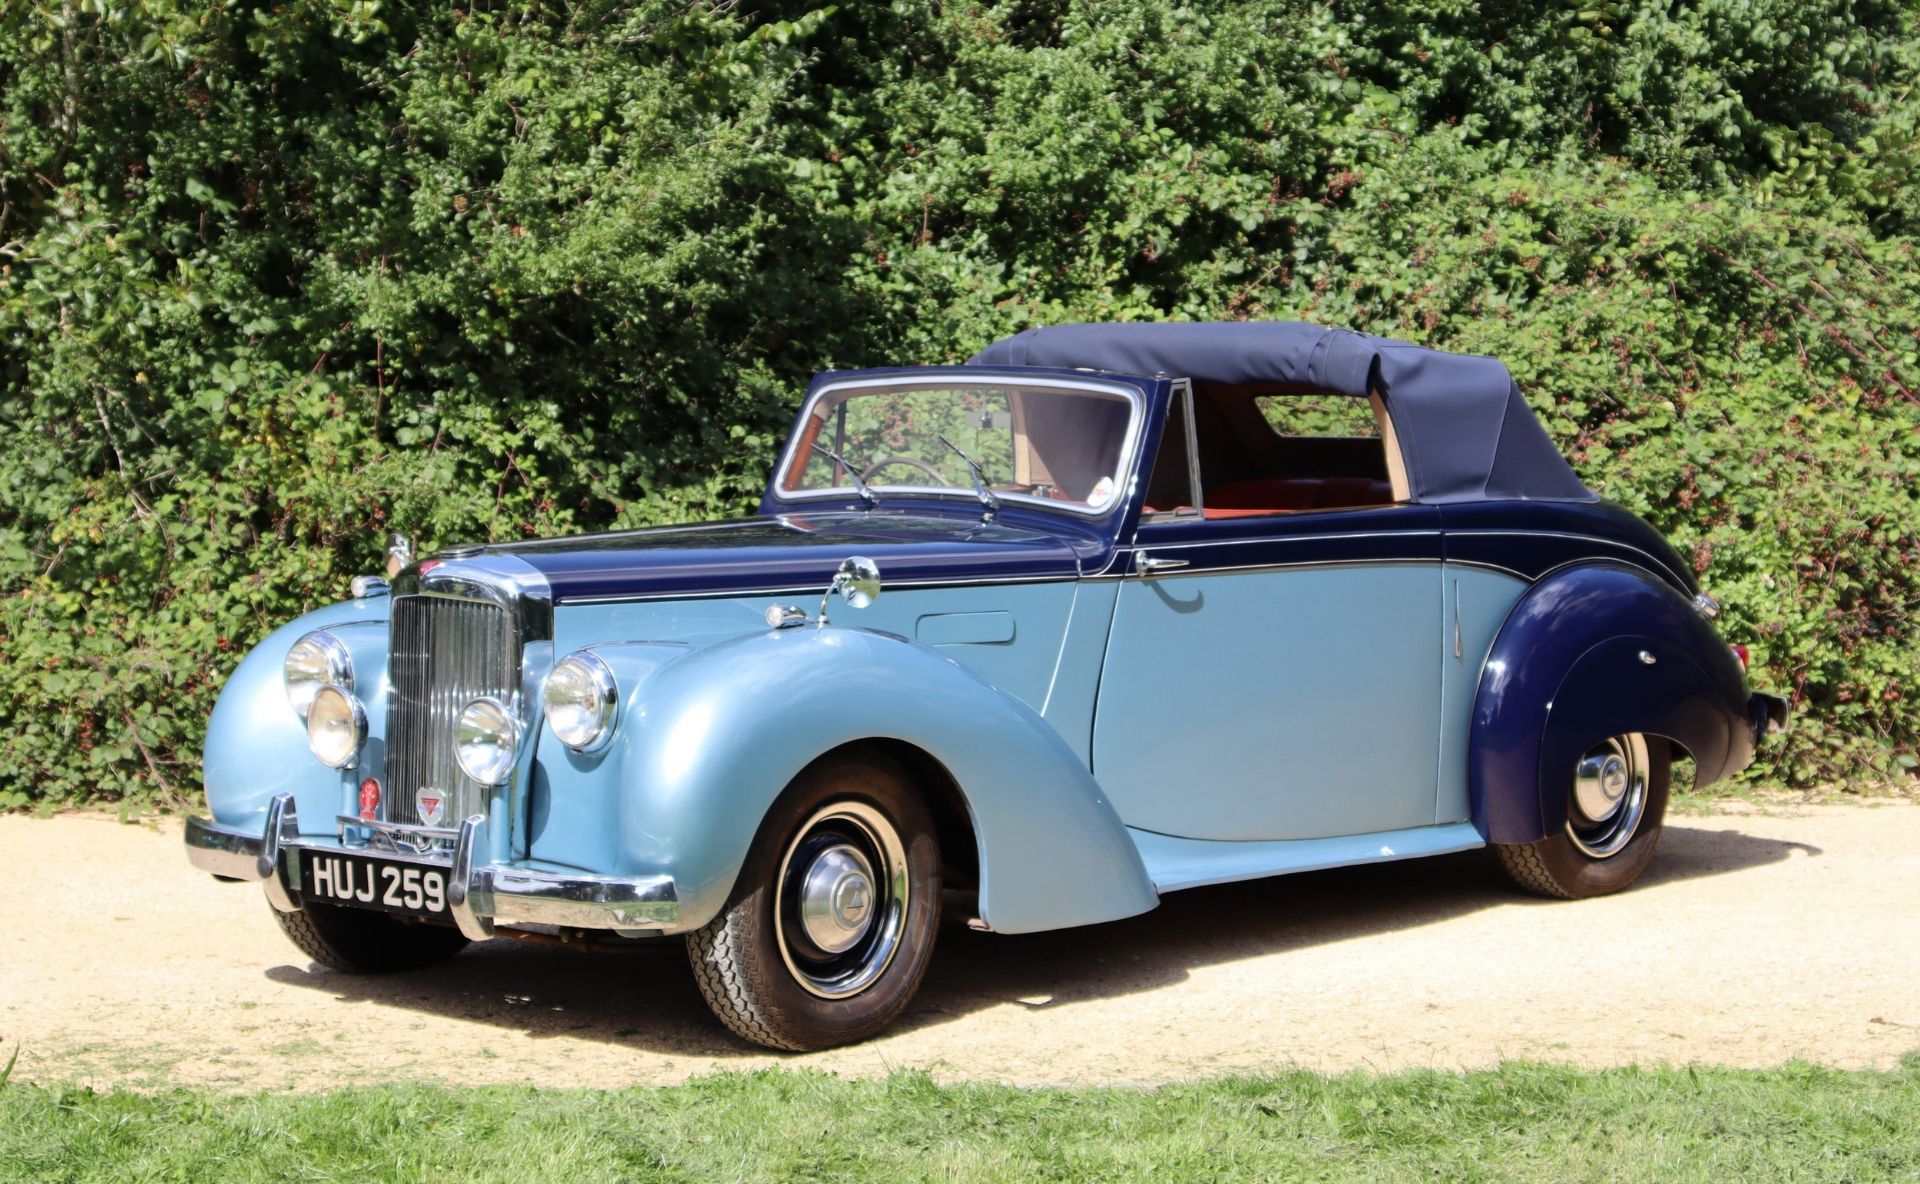 1952 ALVIS TA21 THREE-POSITION DROPHEAD COUPE Registration Number: HUJ 259 Chassis Number: 24489 - Image 9 of 44